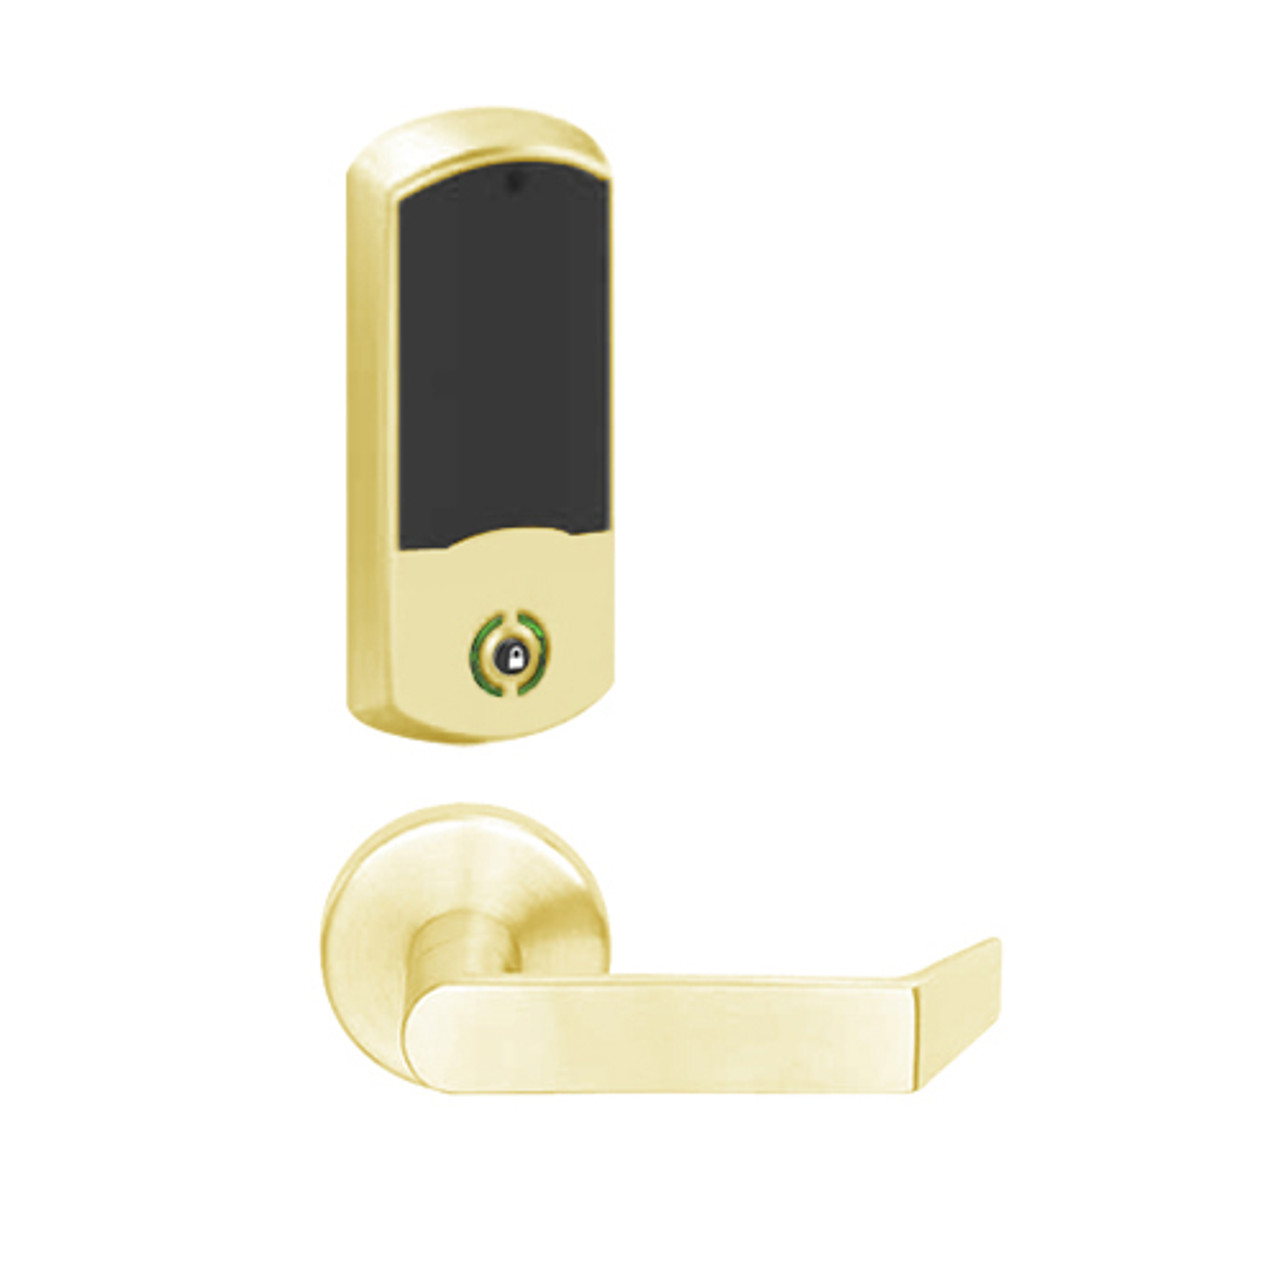 LEMB-GRW-L-06-605-00C Schlage Less Cylinder Privacy/Office Wireless Greenwich Mortise Lock with Push Button & LED Indicator and Rhodes Lever in Bright Brass